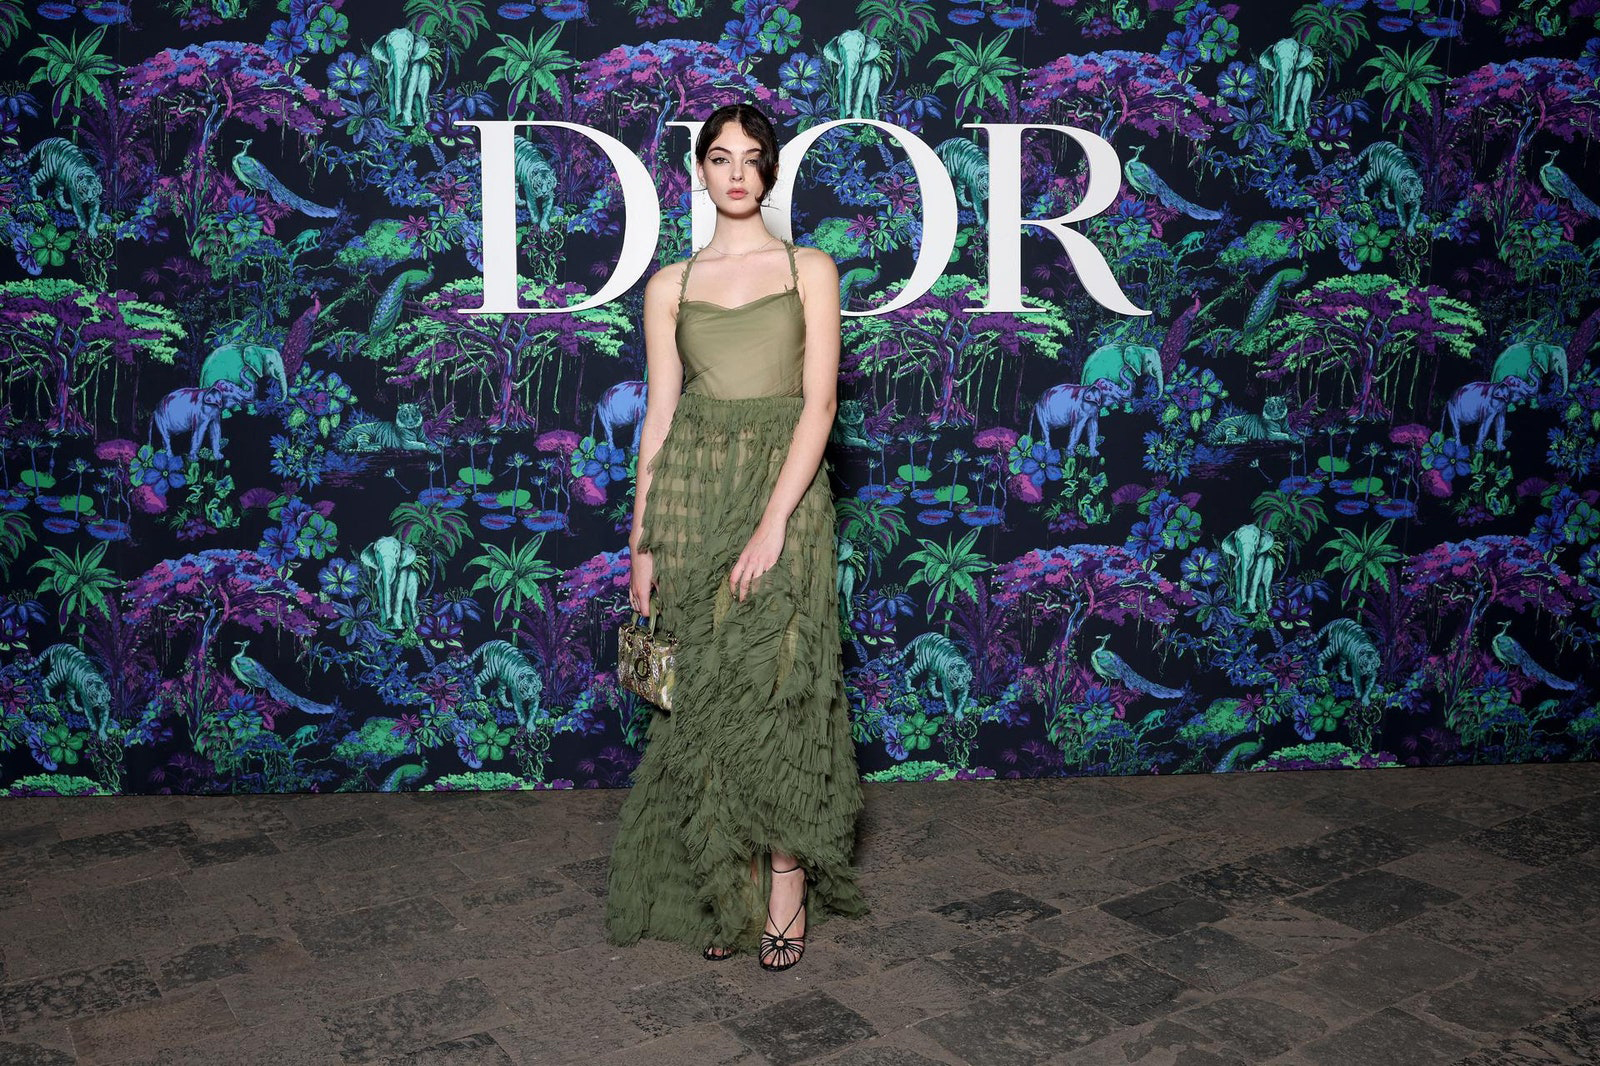 Dior Fall/Winter 2023 Show In Mumbai Deva Cassel wore a Dior Spring-Summer 2023 green silk dress with a Dior bag and shoes.